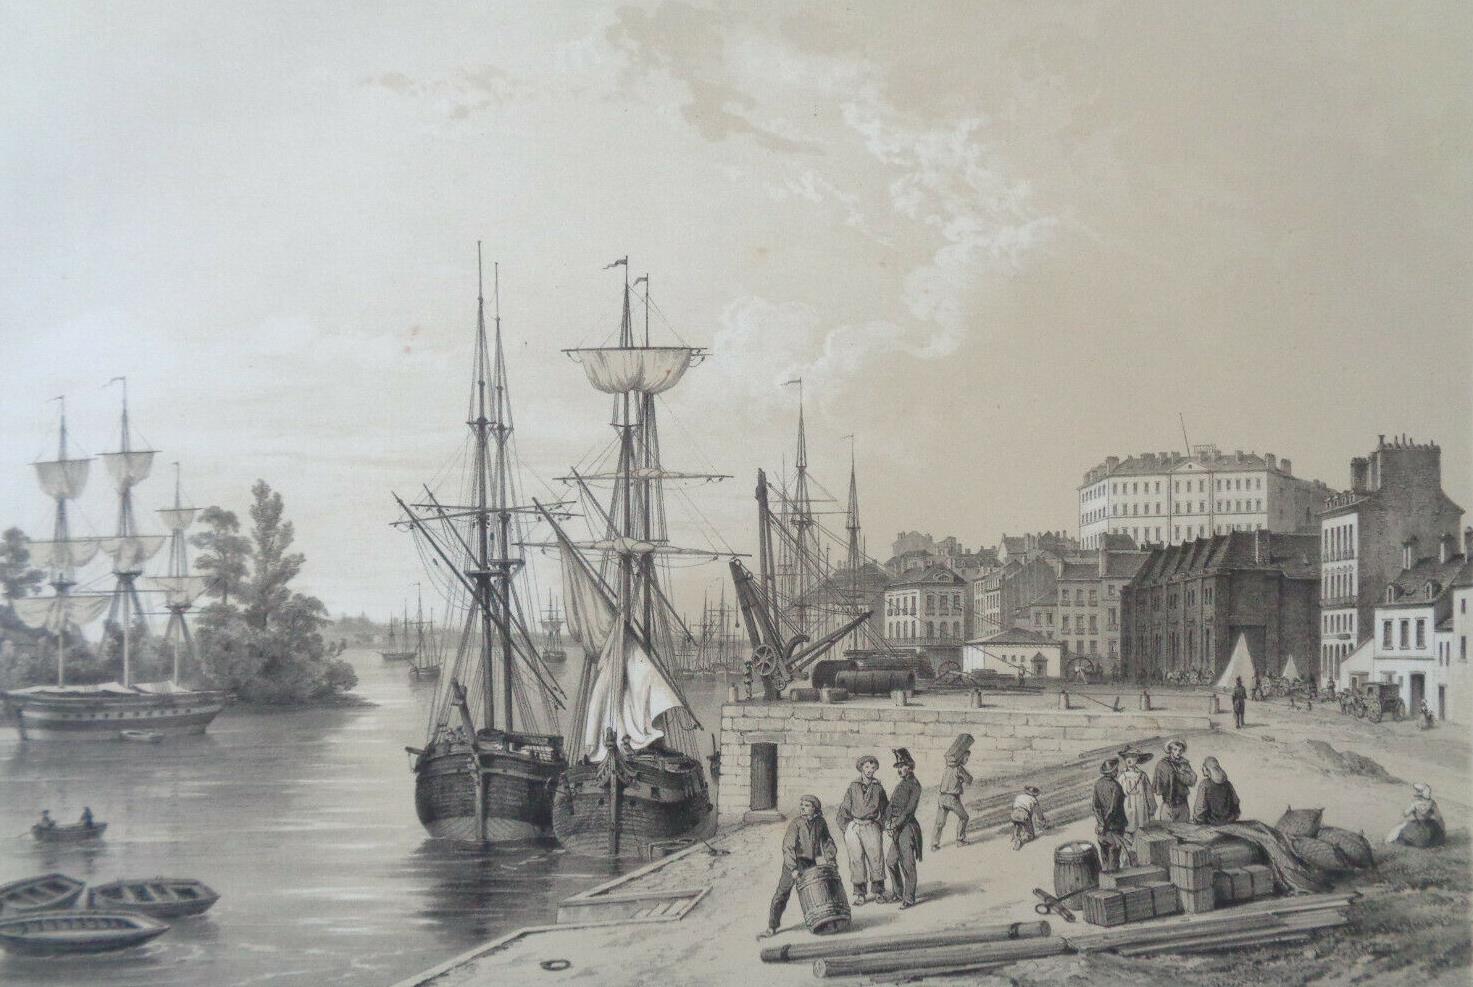 Figure 5 – Lithography by Félix Benoist of the port of Nantes in the middle of the 19th century showing the commercial activity along the quayside.